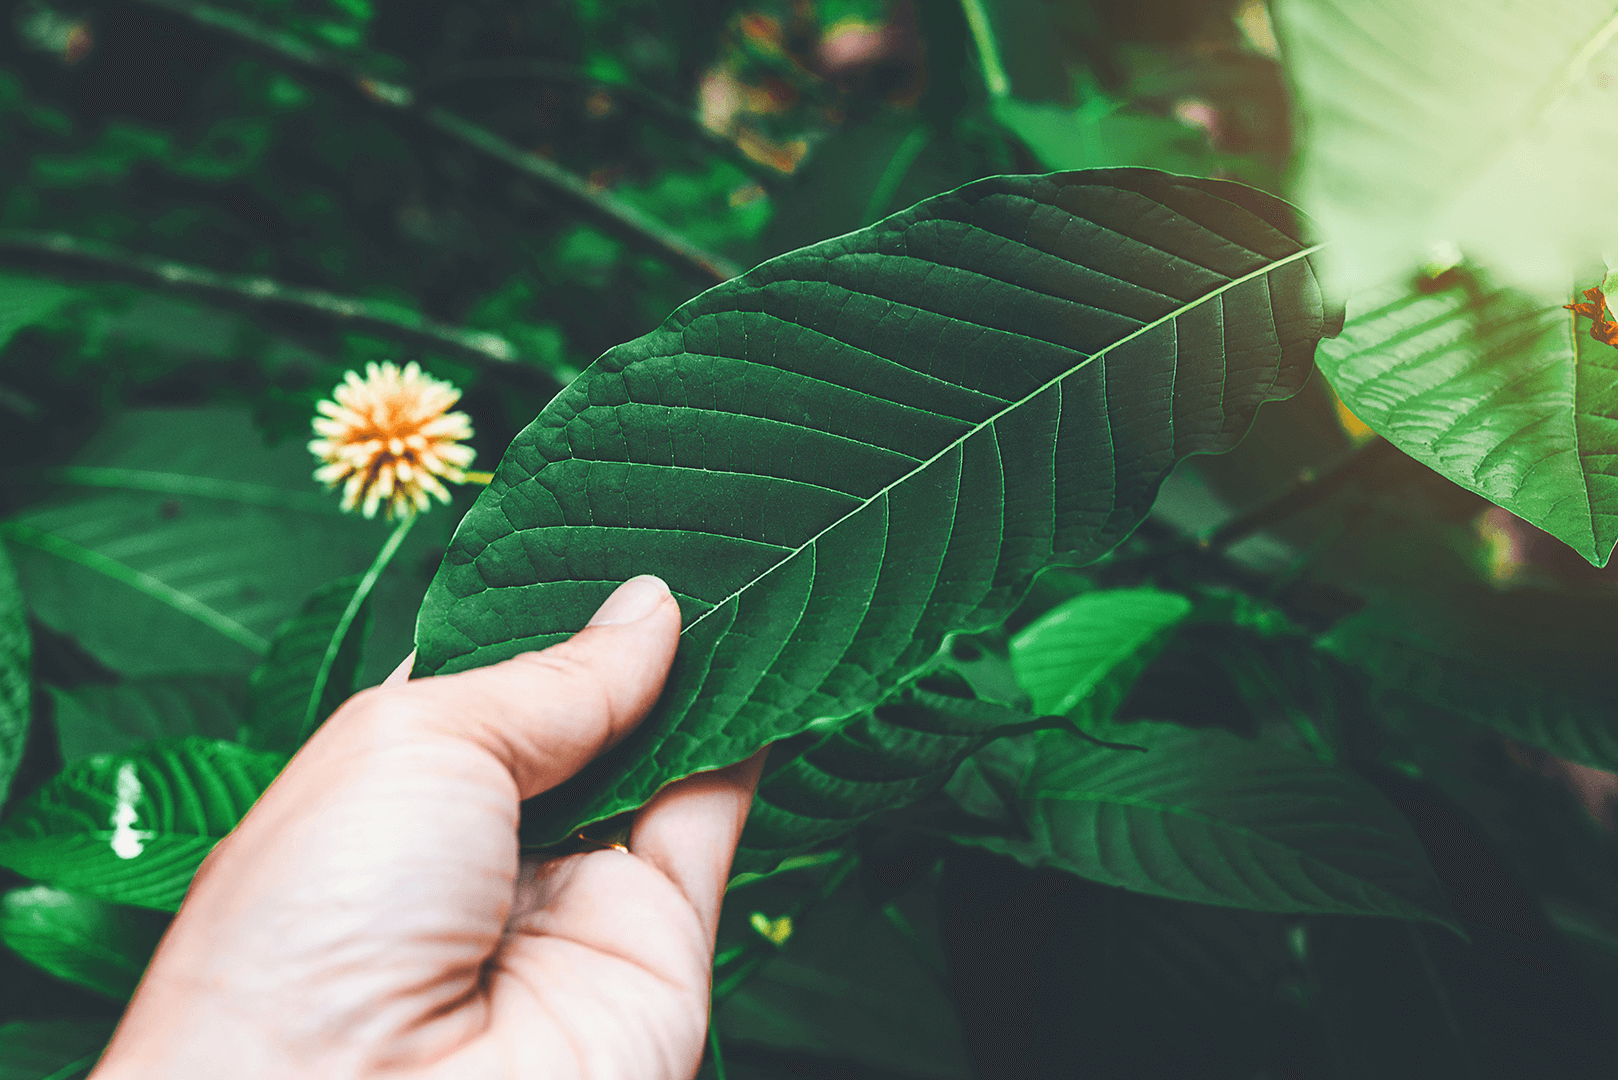 Korth Cottage Leaves (Kratom flowers) growing in nature are addictive and medical